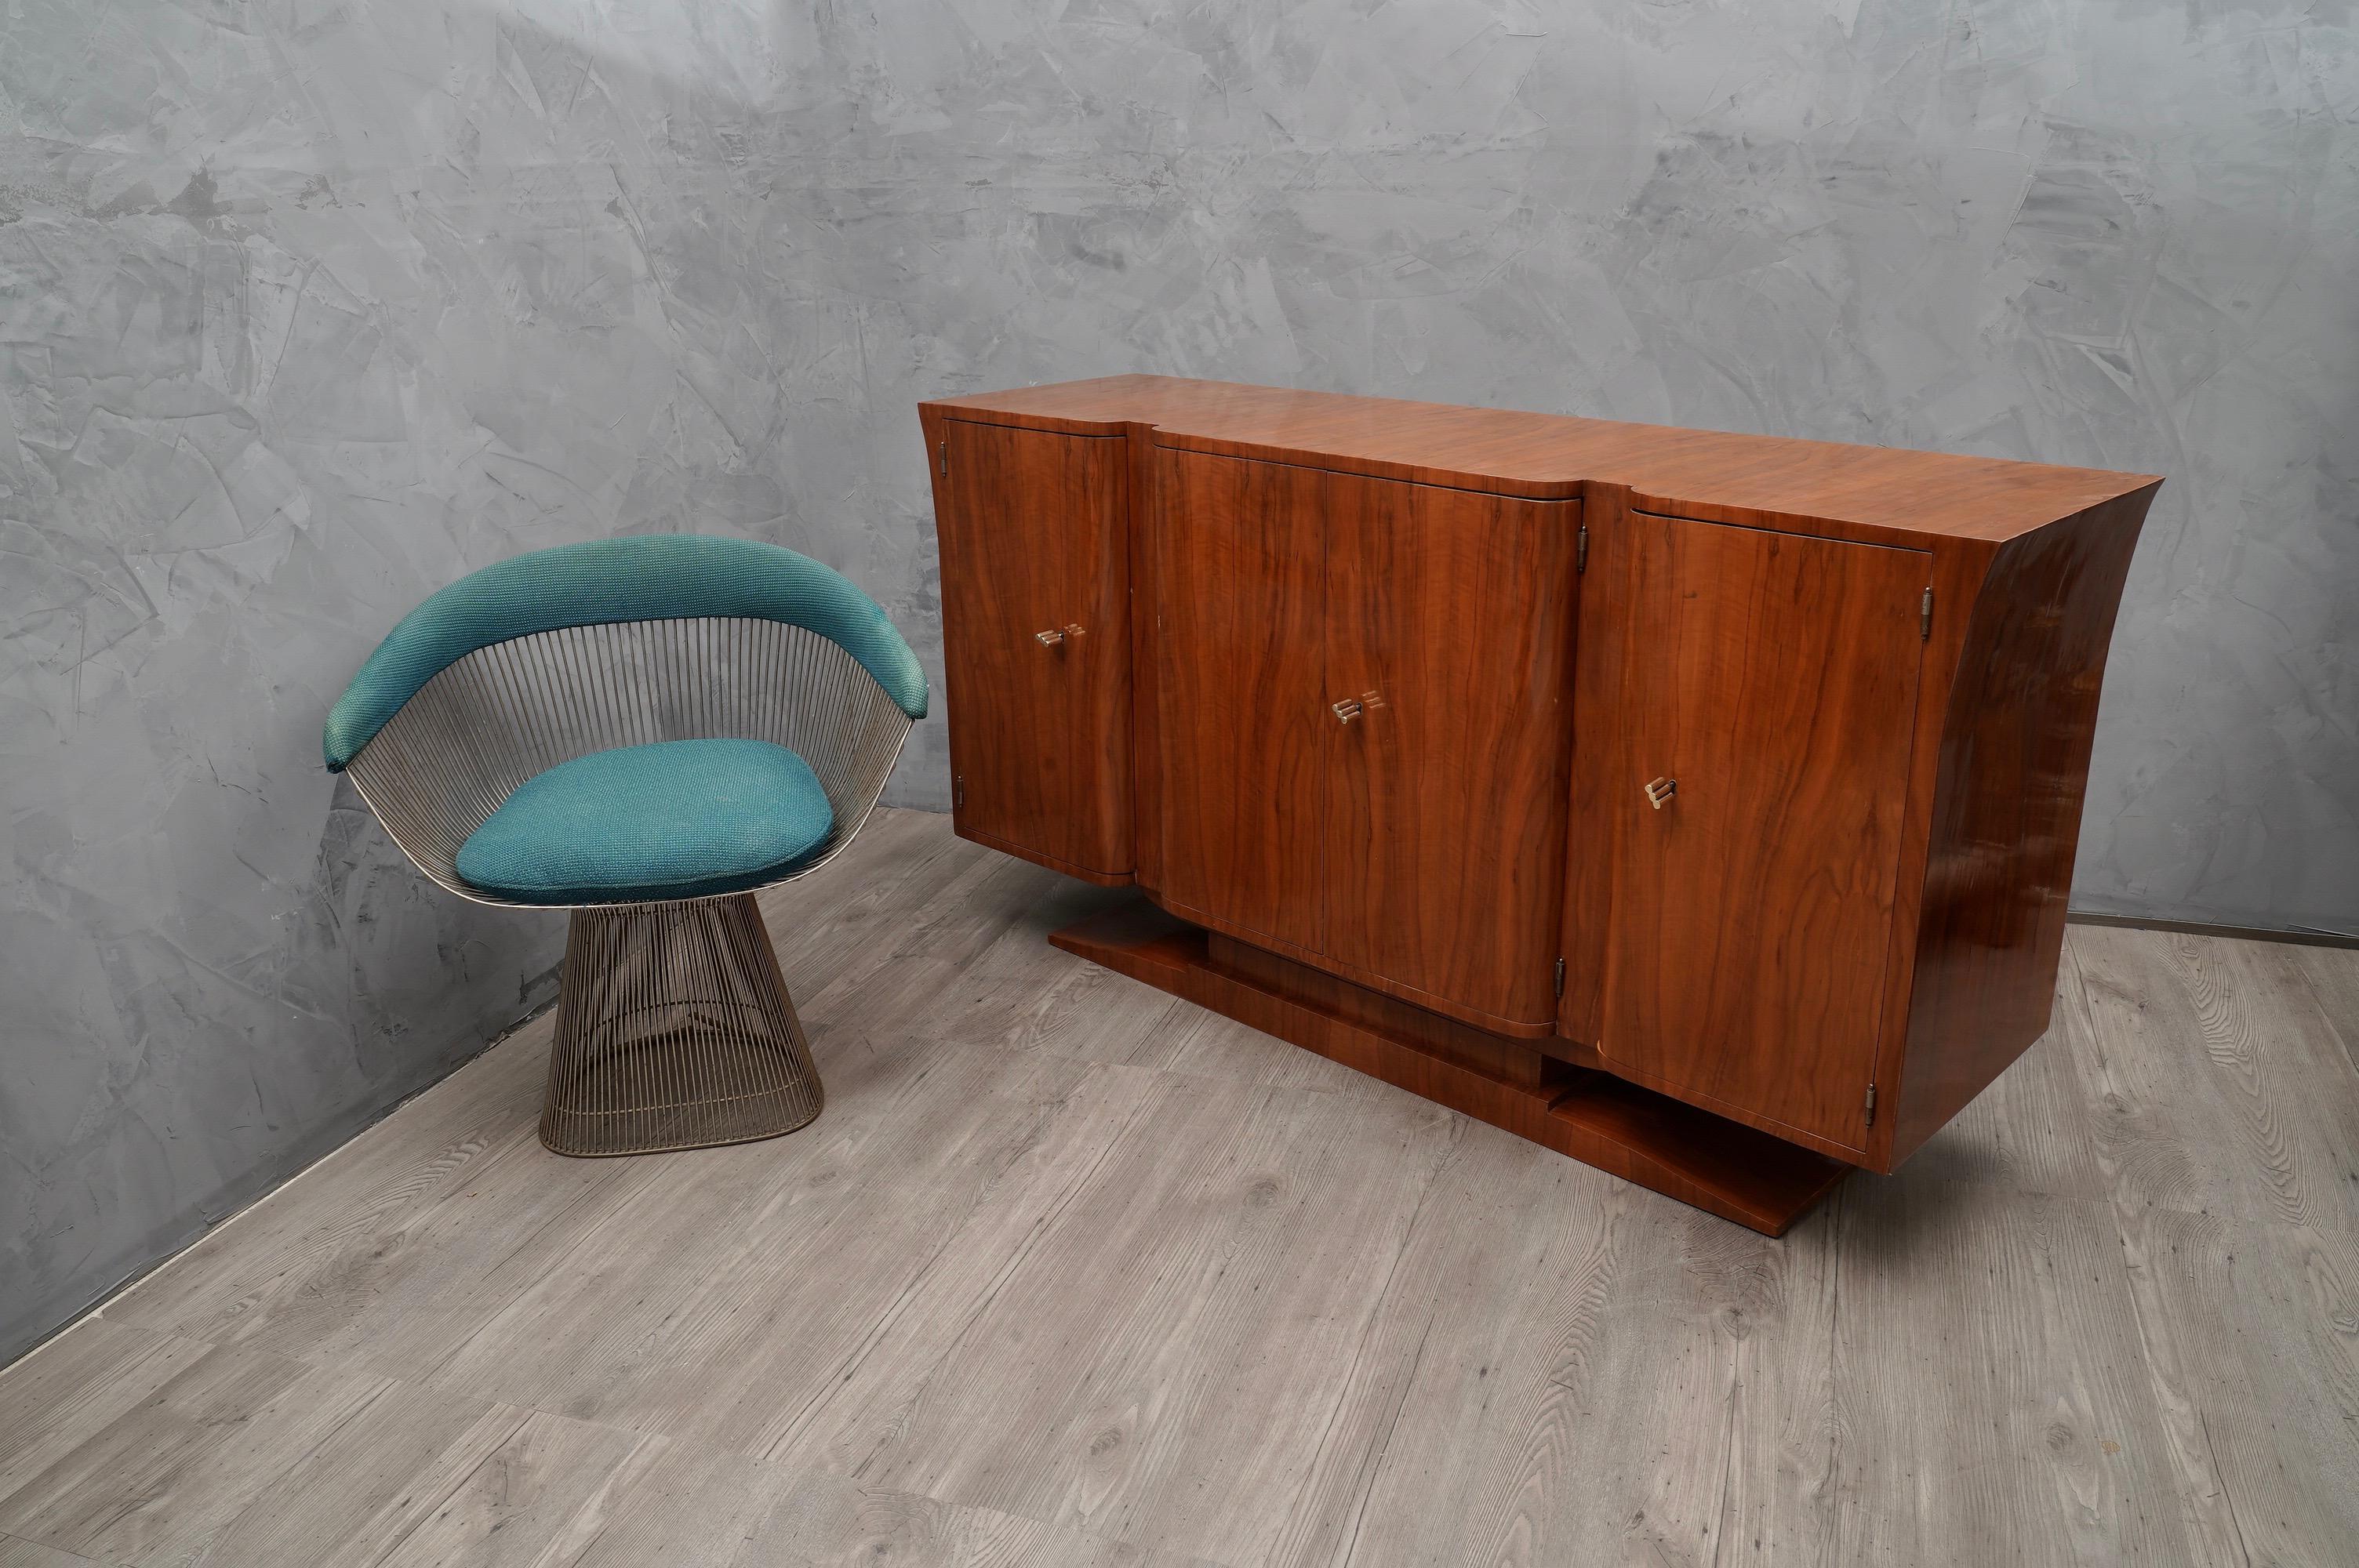 Fantastic patina for this cherry wood sideboard, with a very warm color.

All veneer in cherrywood. Composed of four doors, two side singles and two coupled central doors. The doors do not have a sharp edge but rounded edge. The sides of the